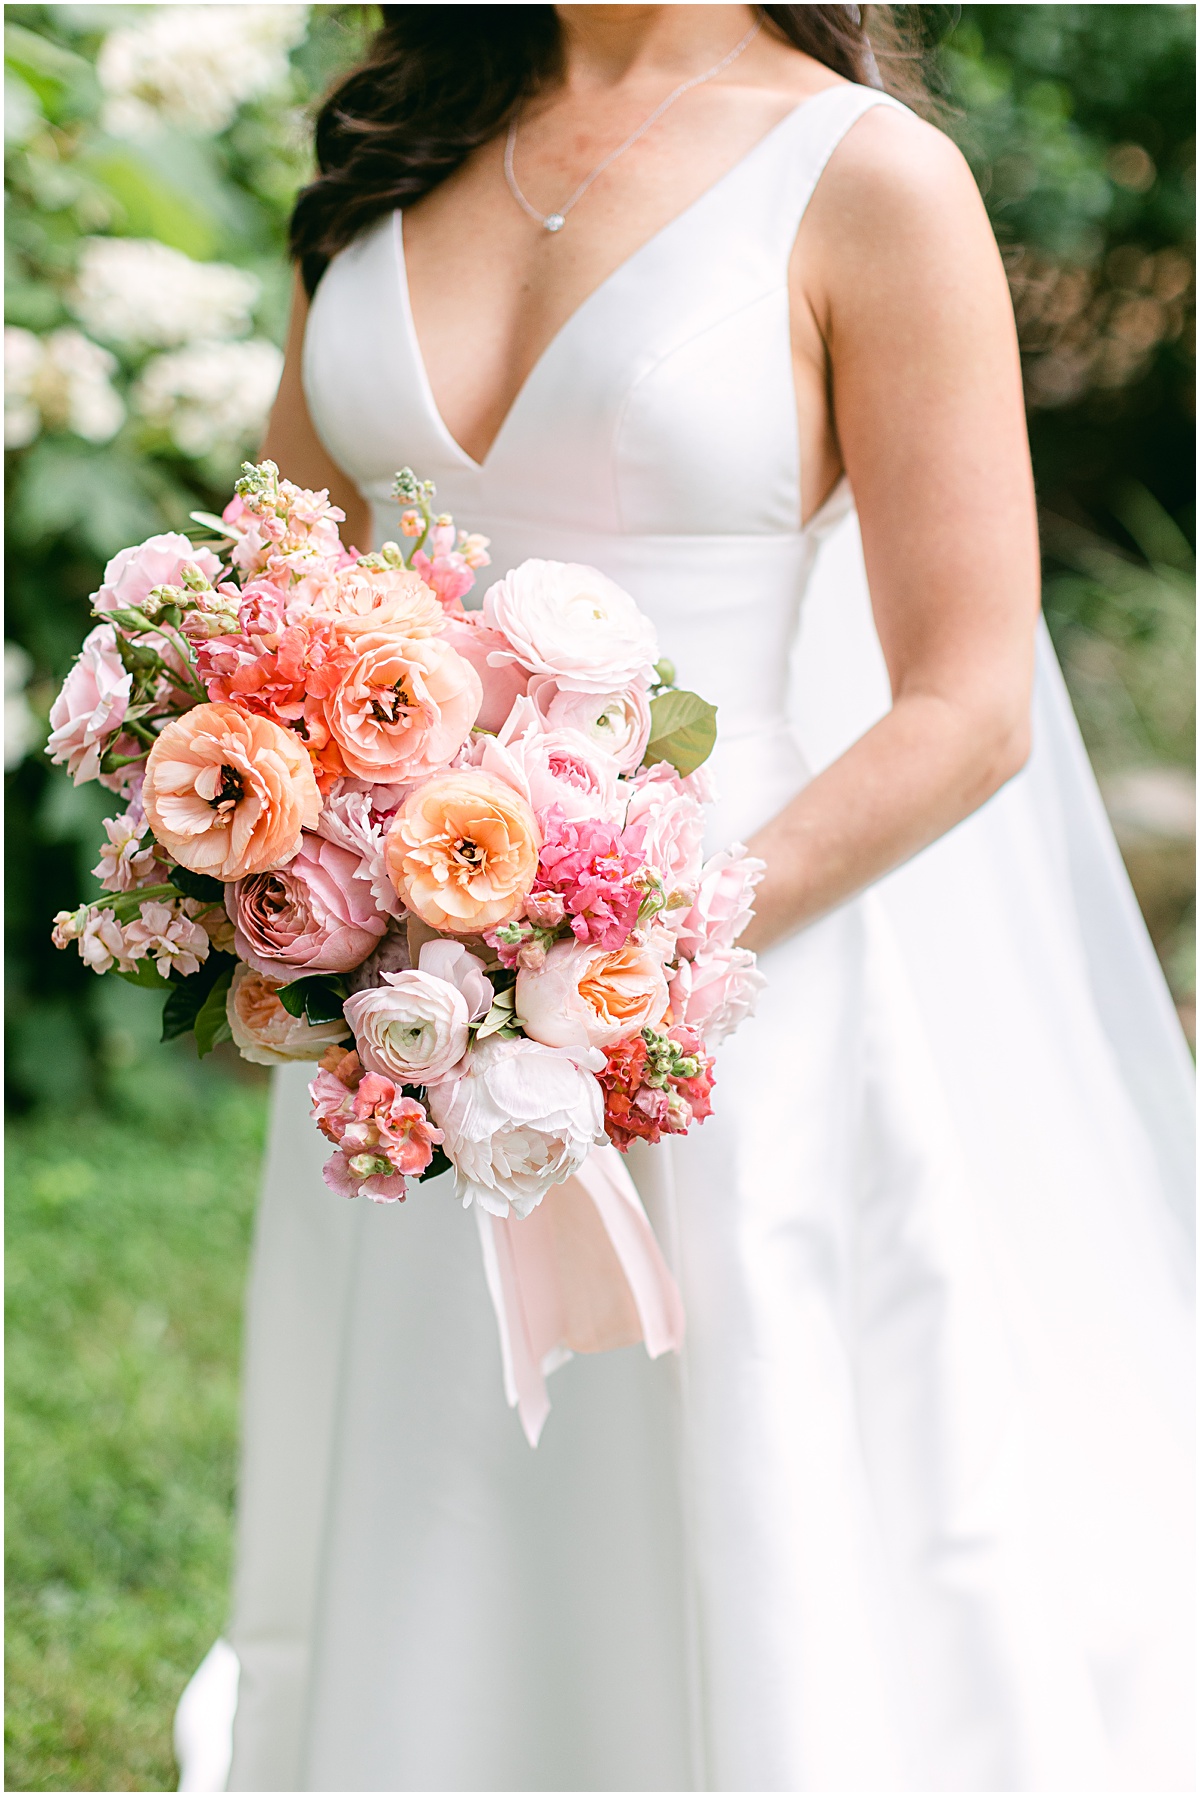 Bouquet by Holly Chapple, dress by Monique Lhuillier. Joyful summer wedding at the Inn at Willow Grove by Sarah Bradshaw.